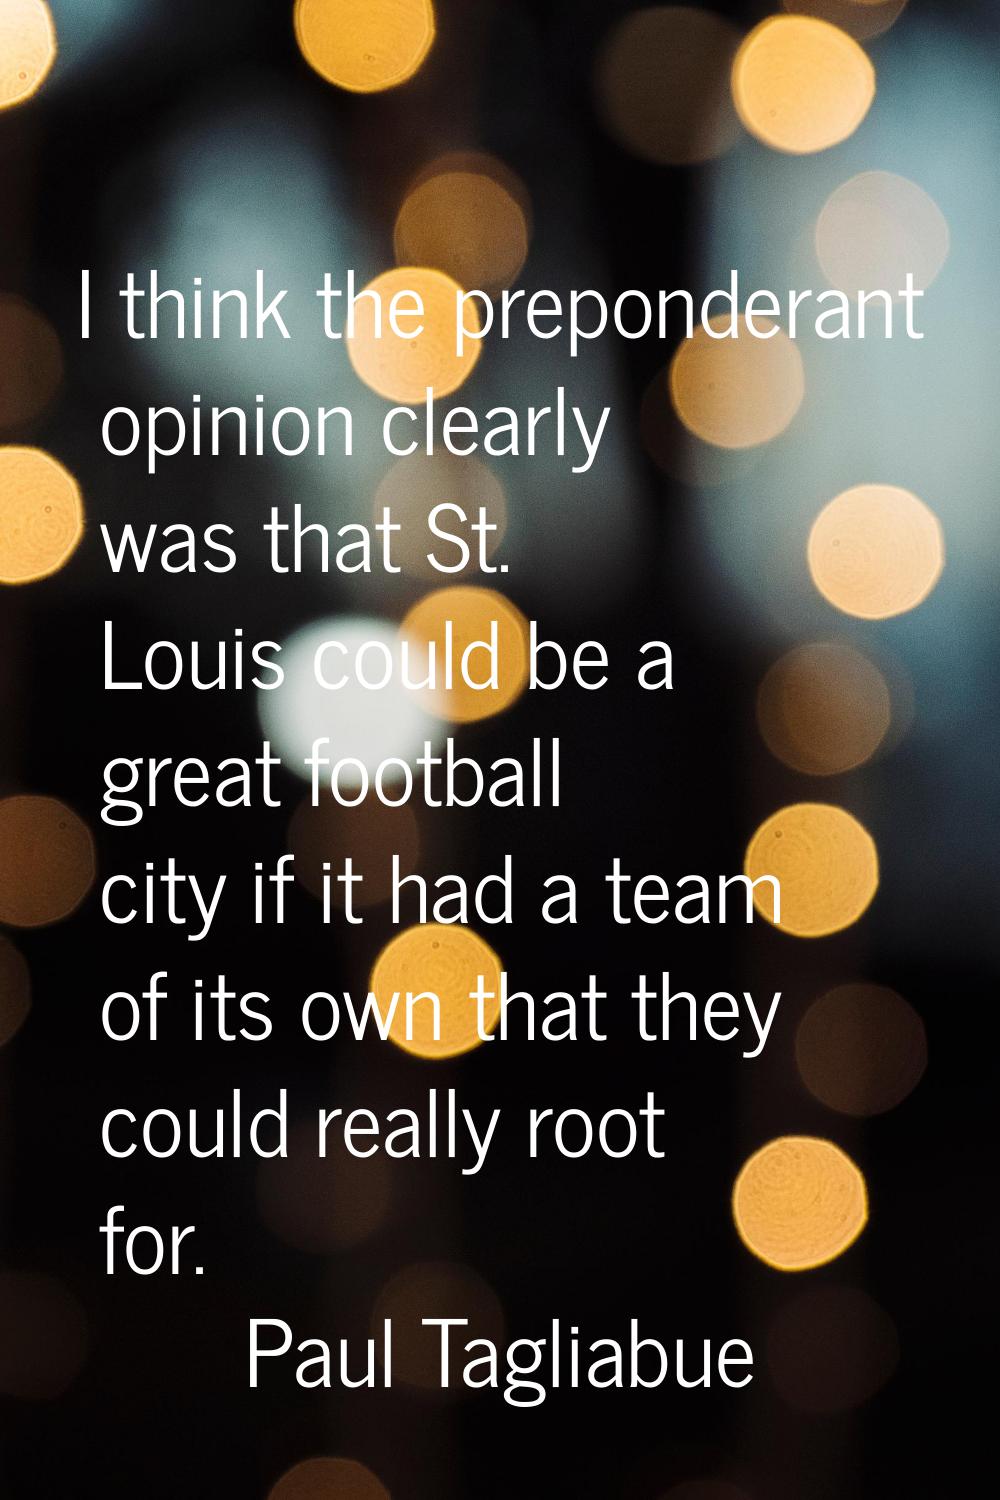 I think the preponderant opinion clearly was that St. Louis could be a great football city if it ha